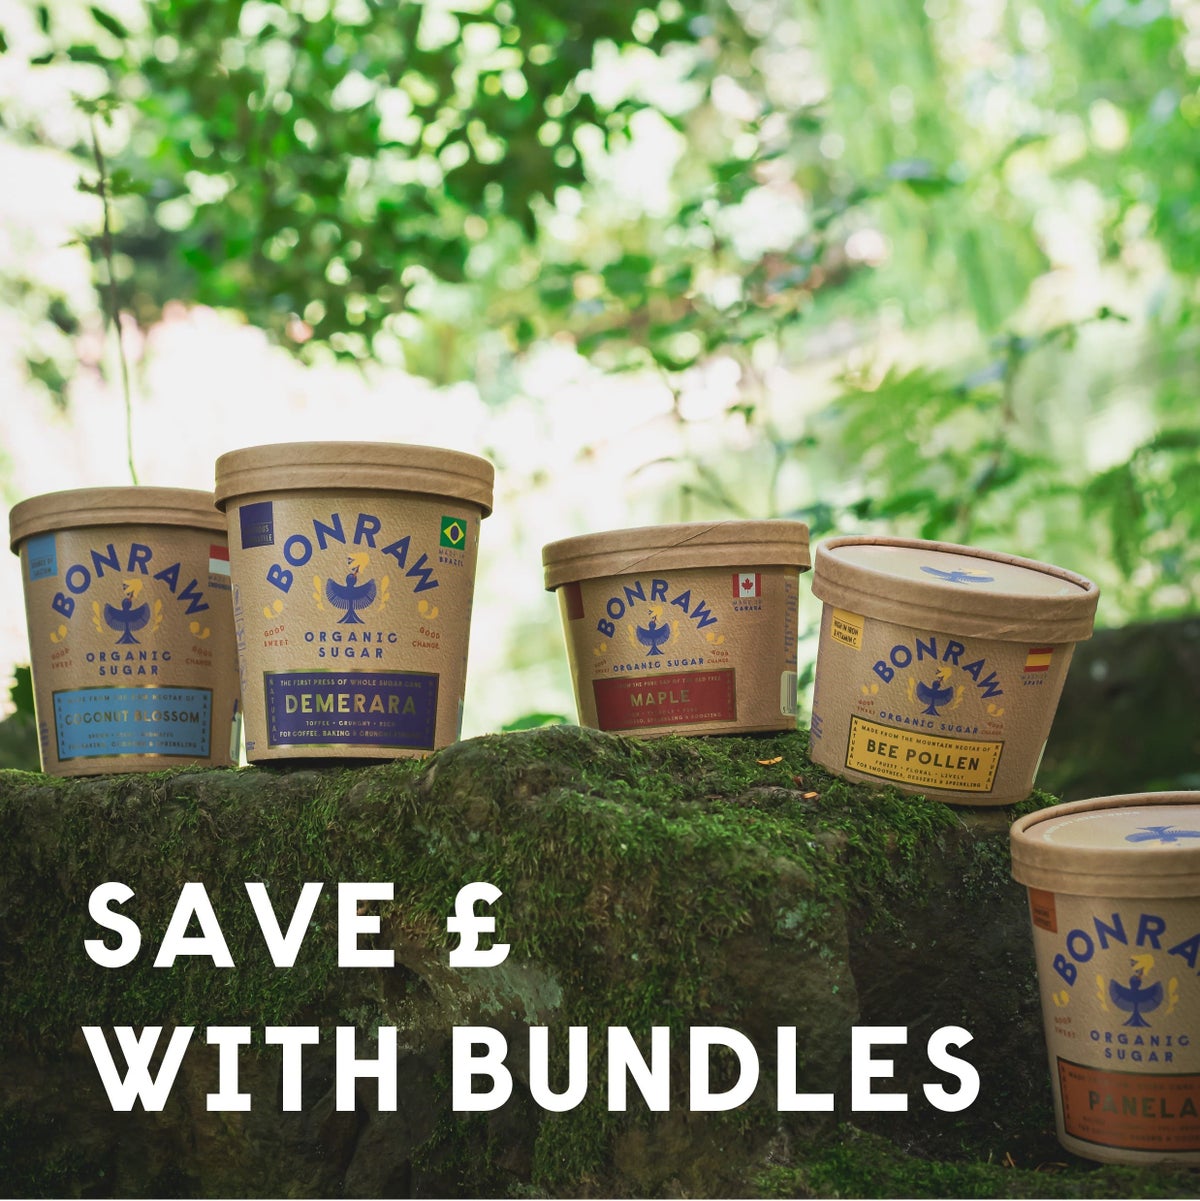 Save £ with bundles.